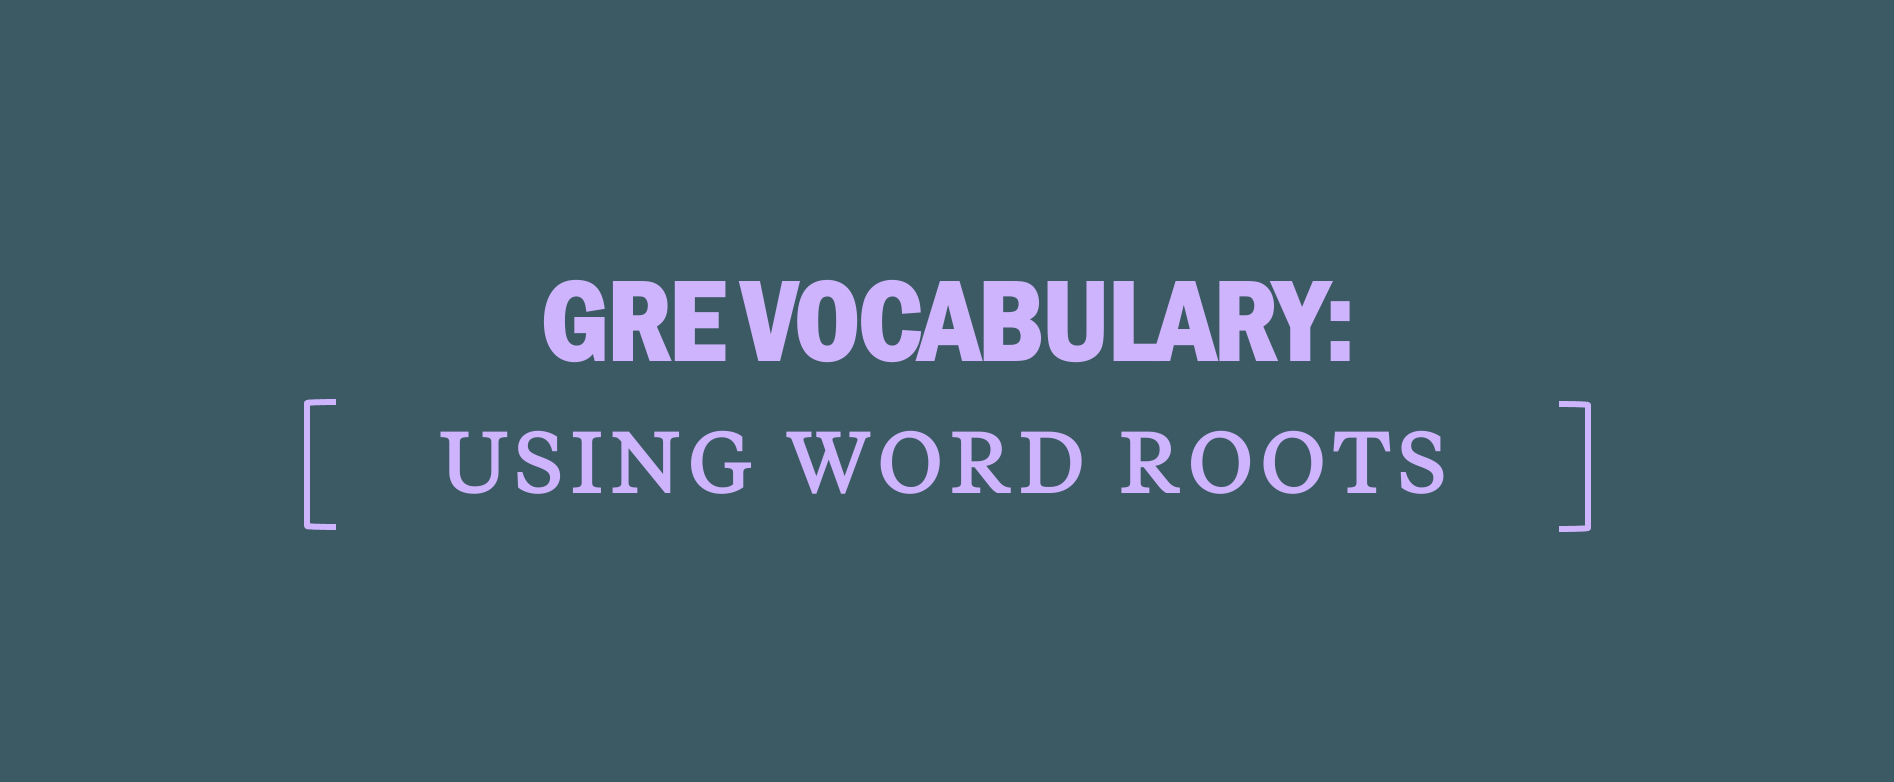 gre-verbal-gre-vocabulary-root-words